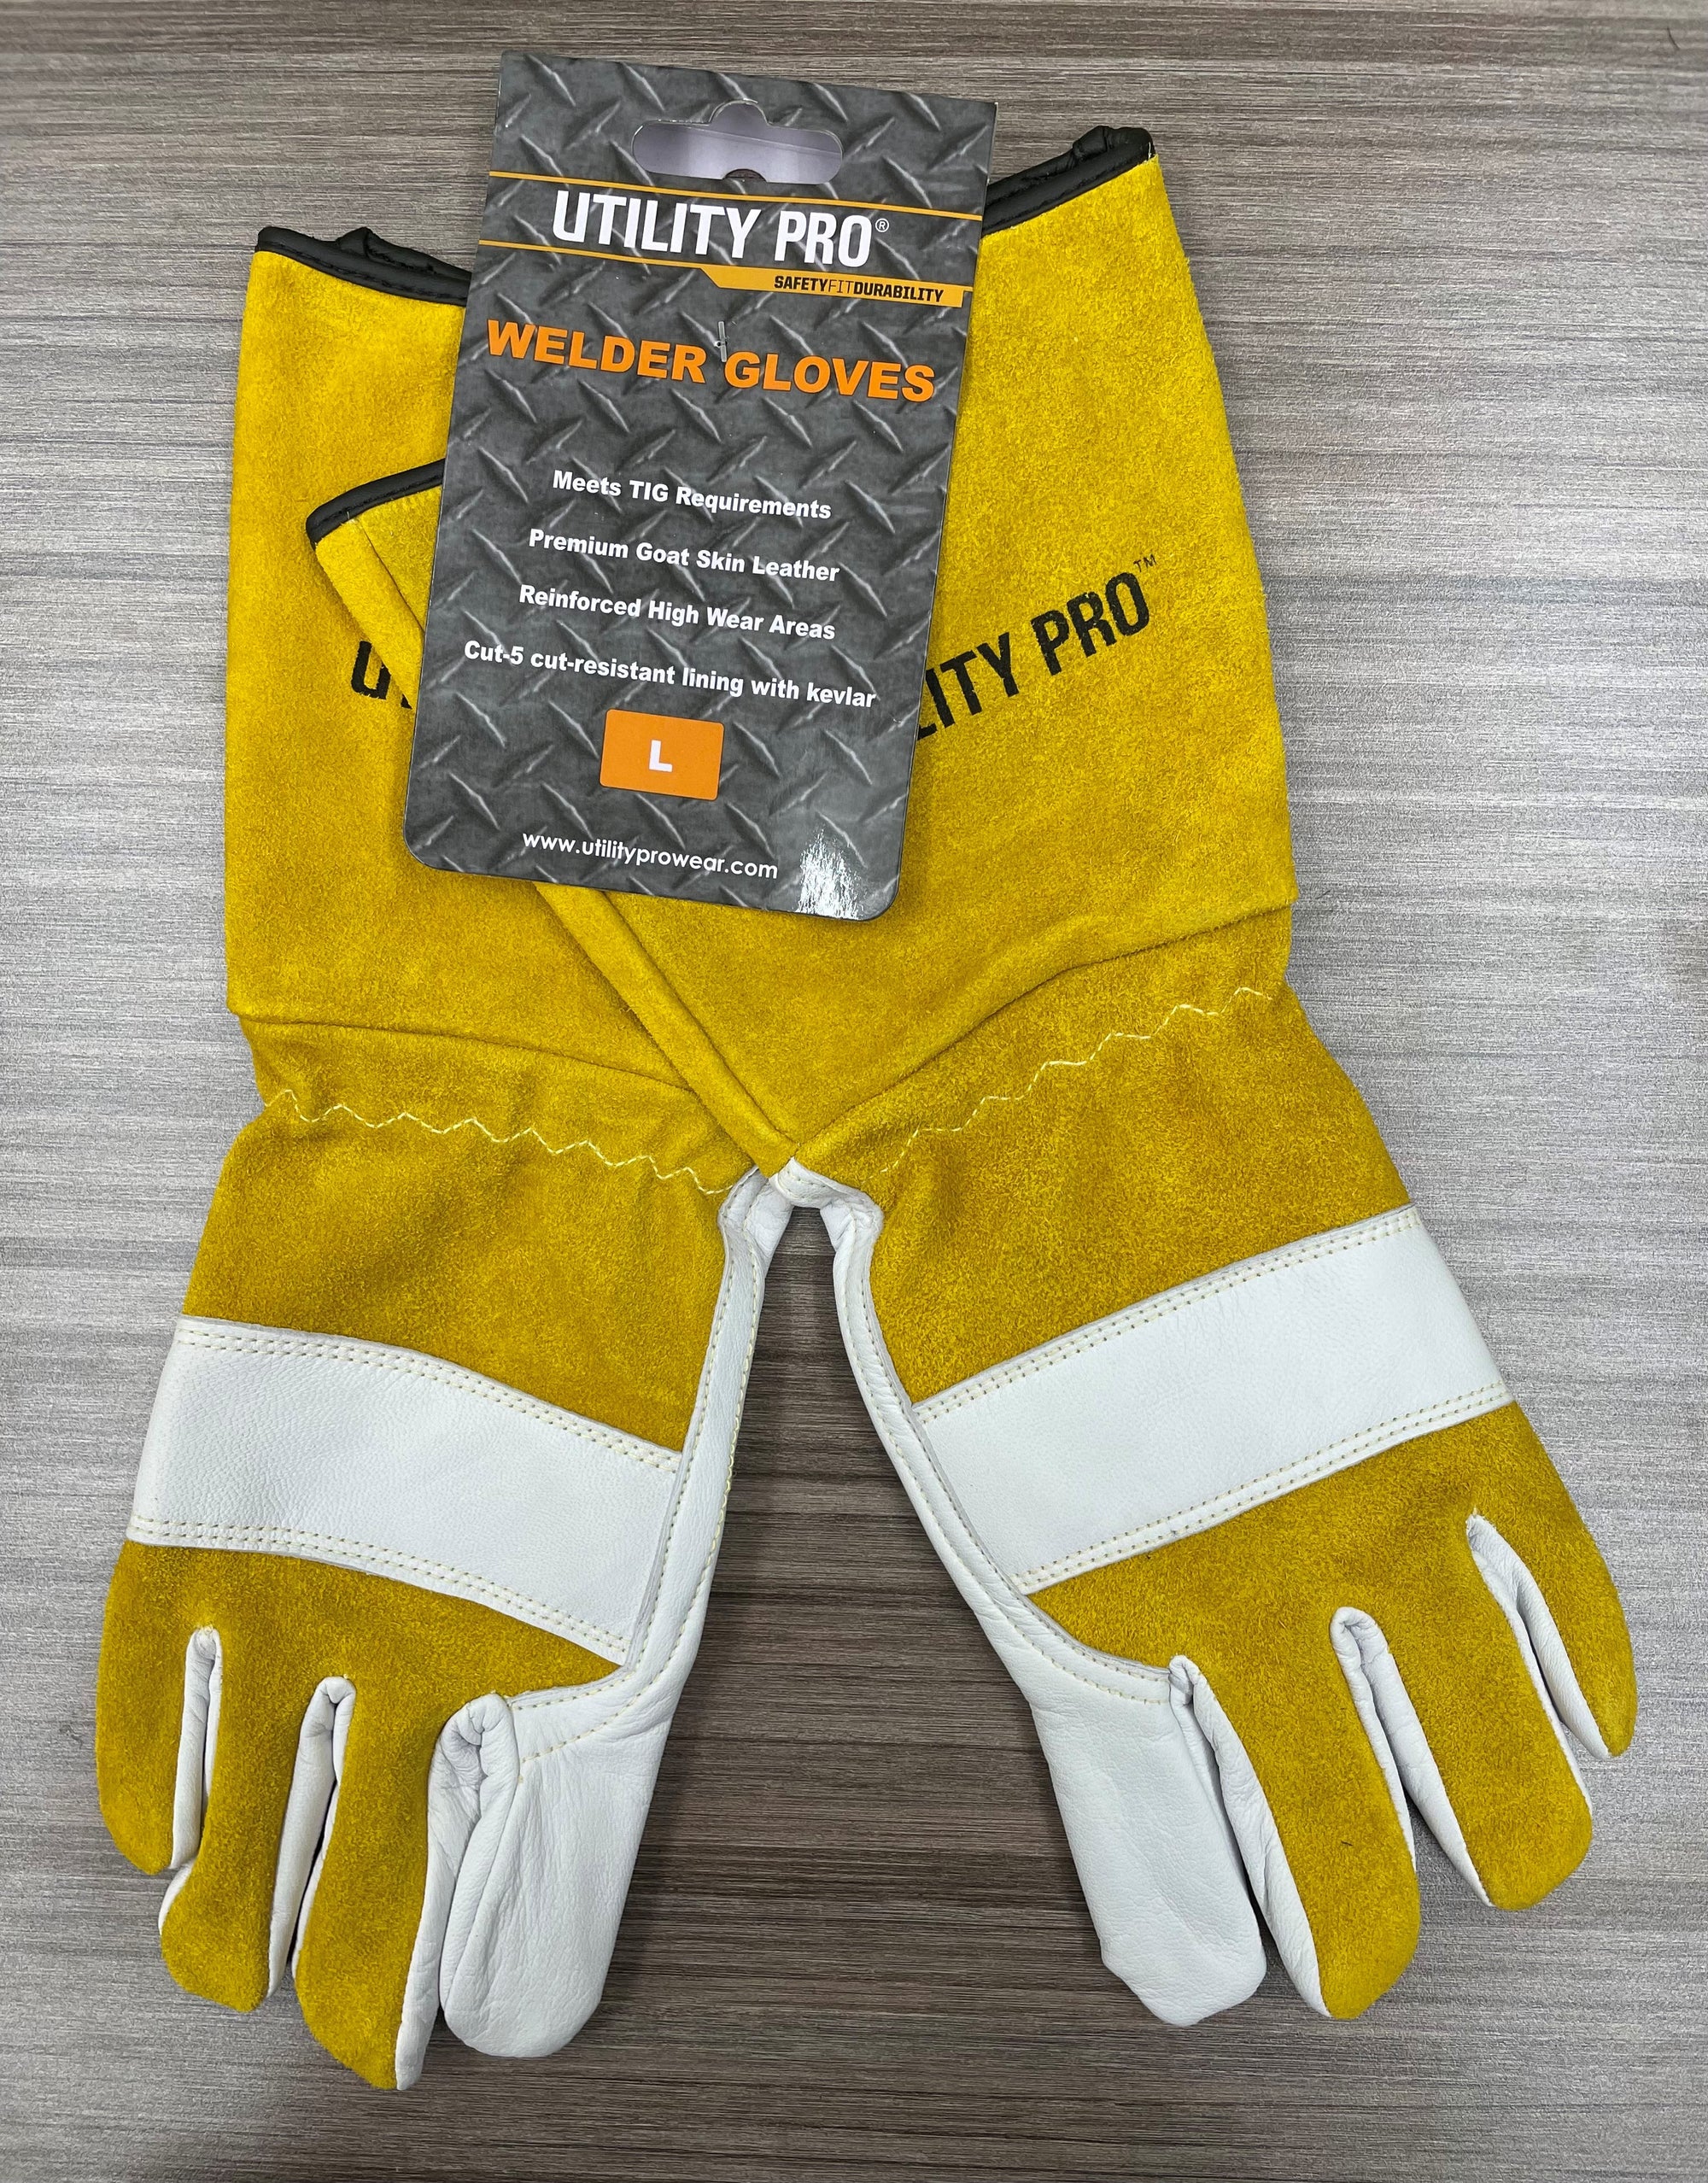 Cut 5 cut-resistant Kelvar lining meets all TIG requirements goat skin leather Welding gloves by Utility Pro